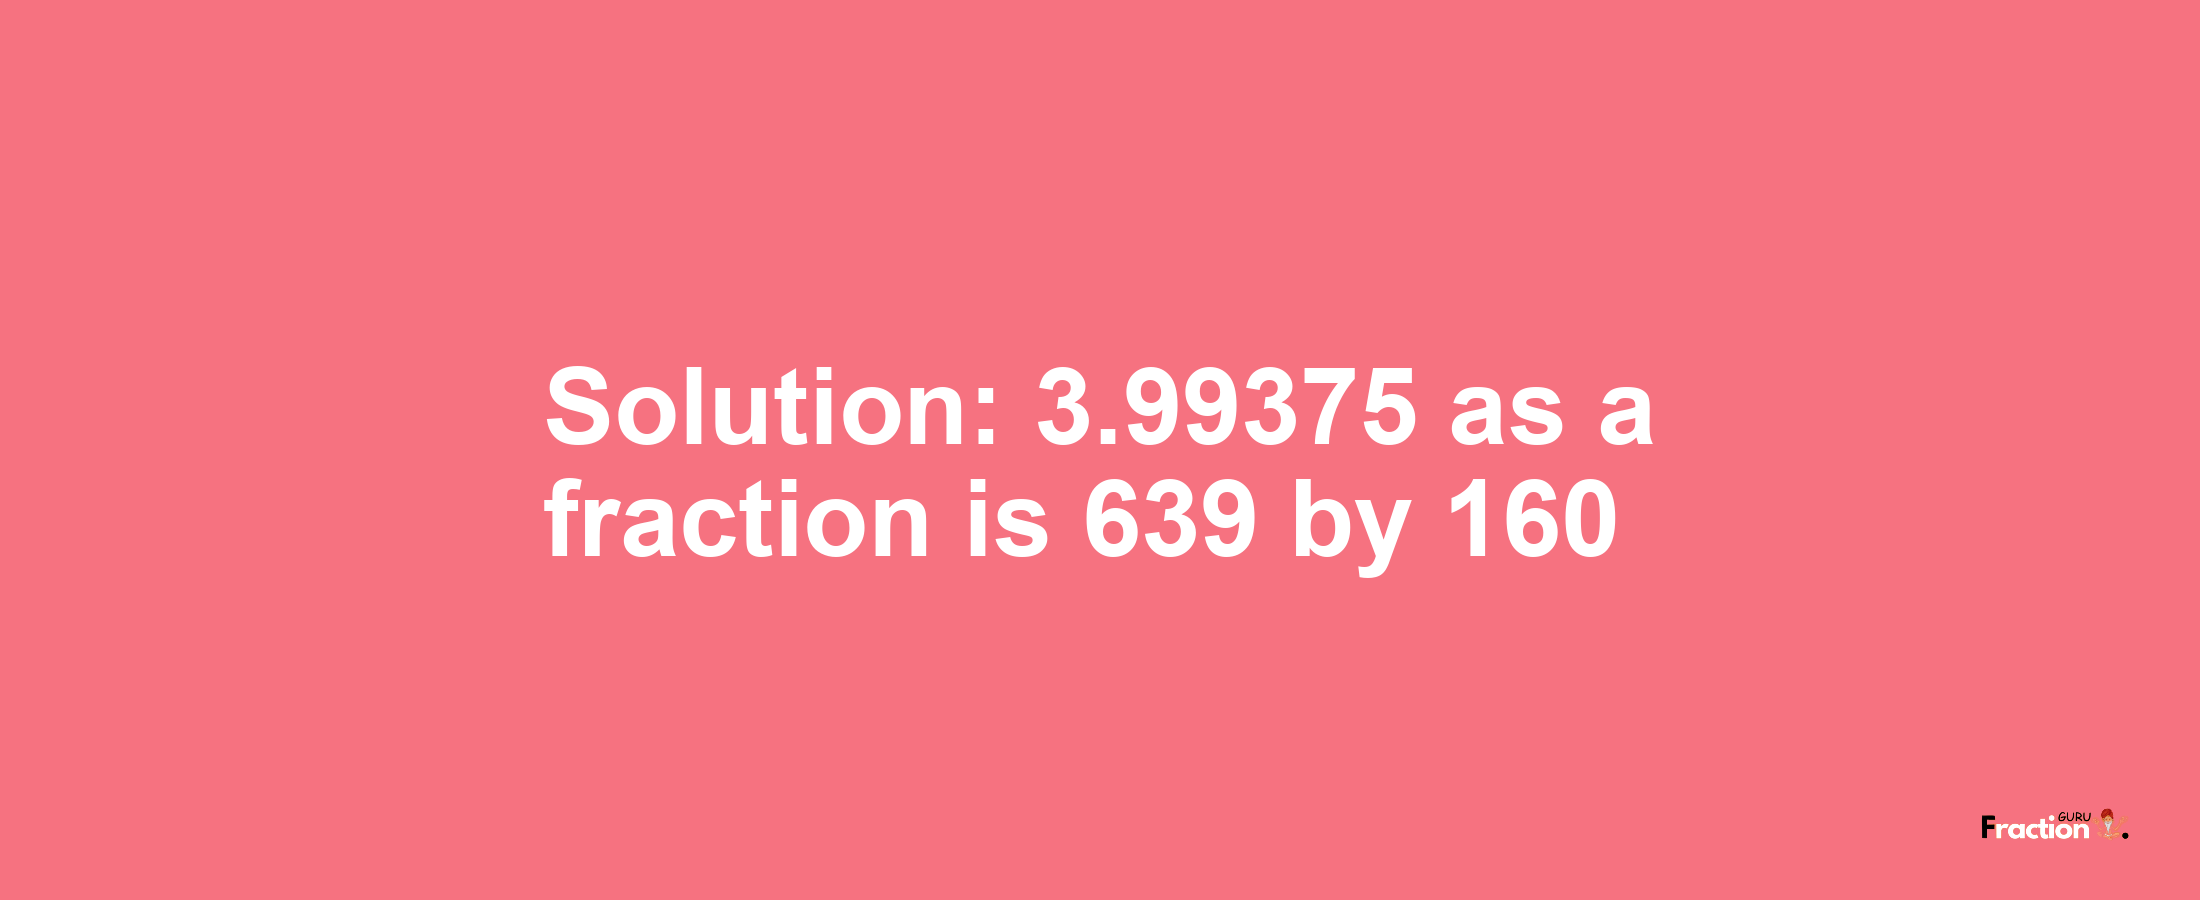 Solution:3.99375 as a fraction is 639/160